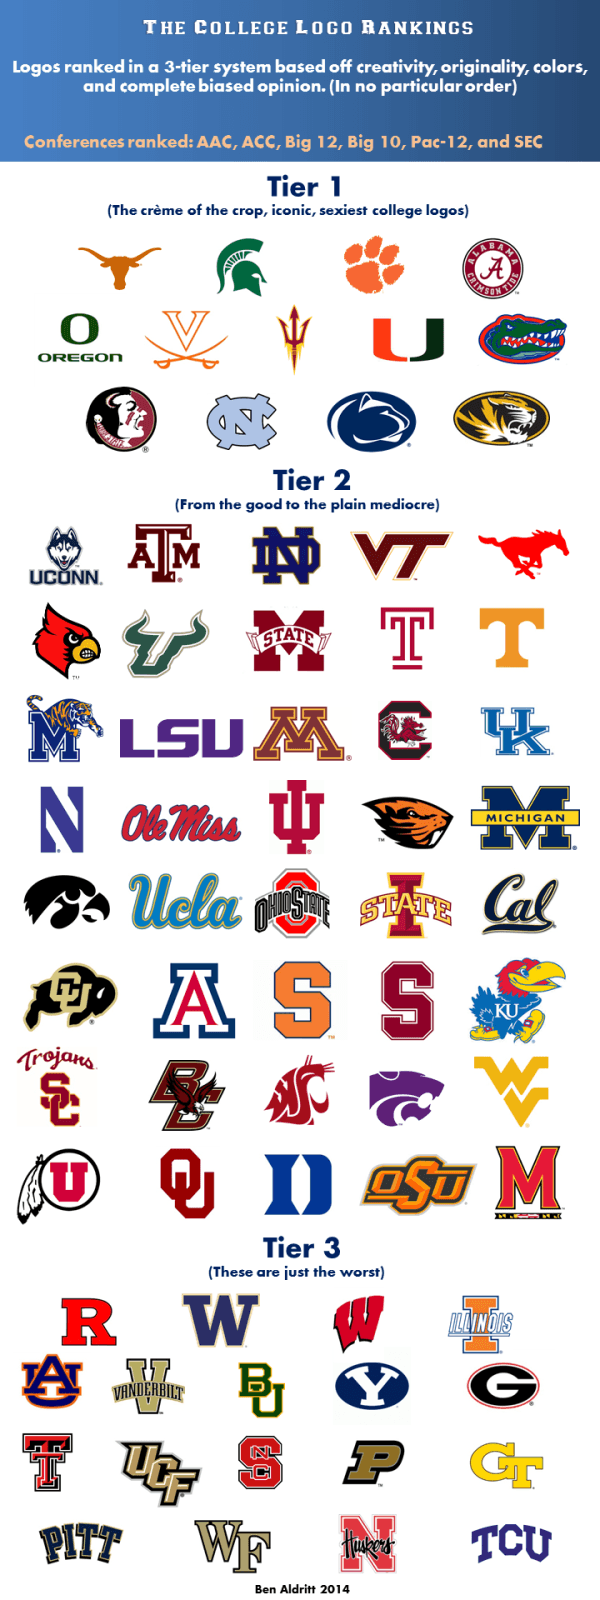 Most Popular College Logo - The College Logo Rankings | CycloneFanatic: The Internet's most ...